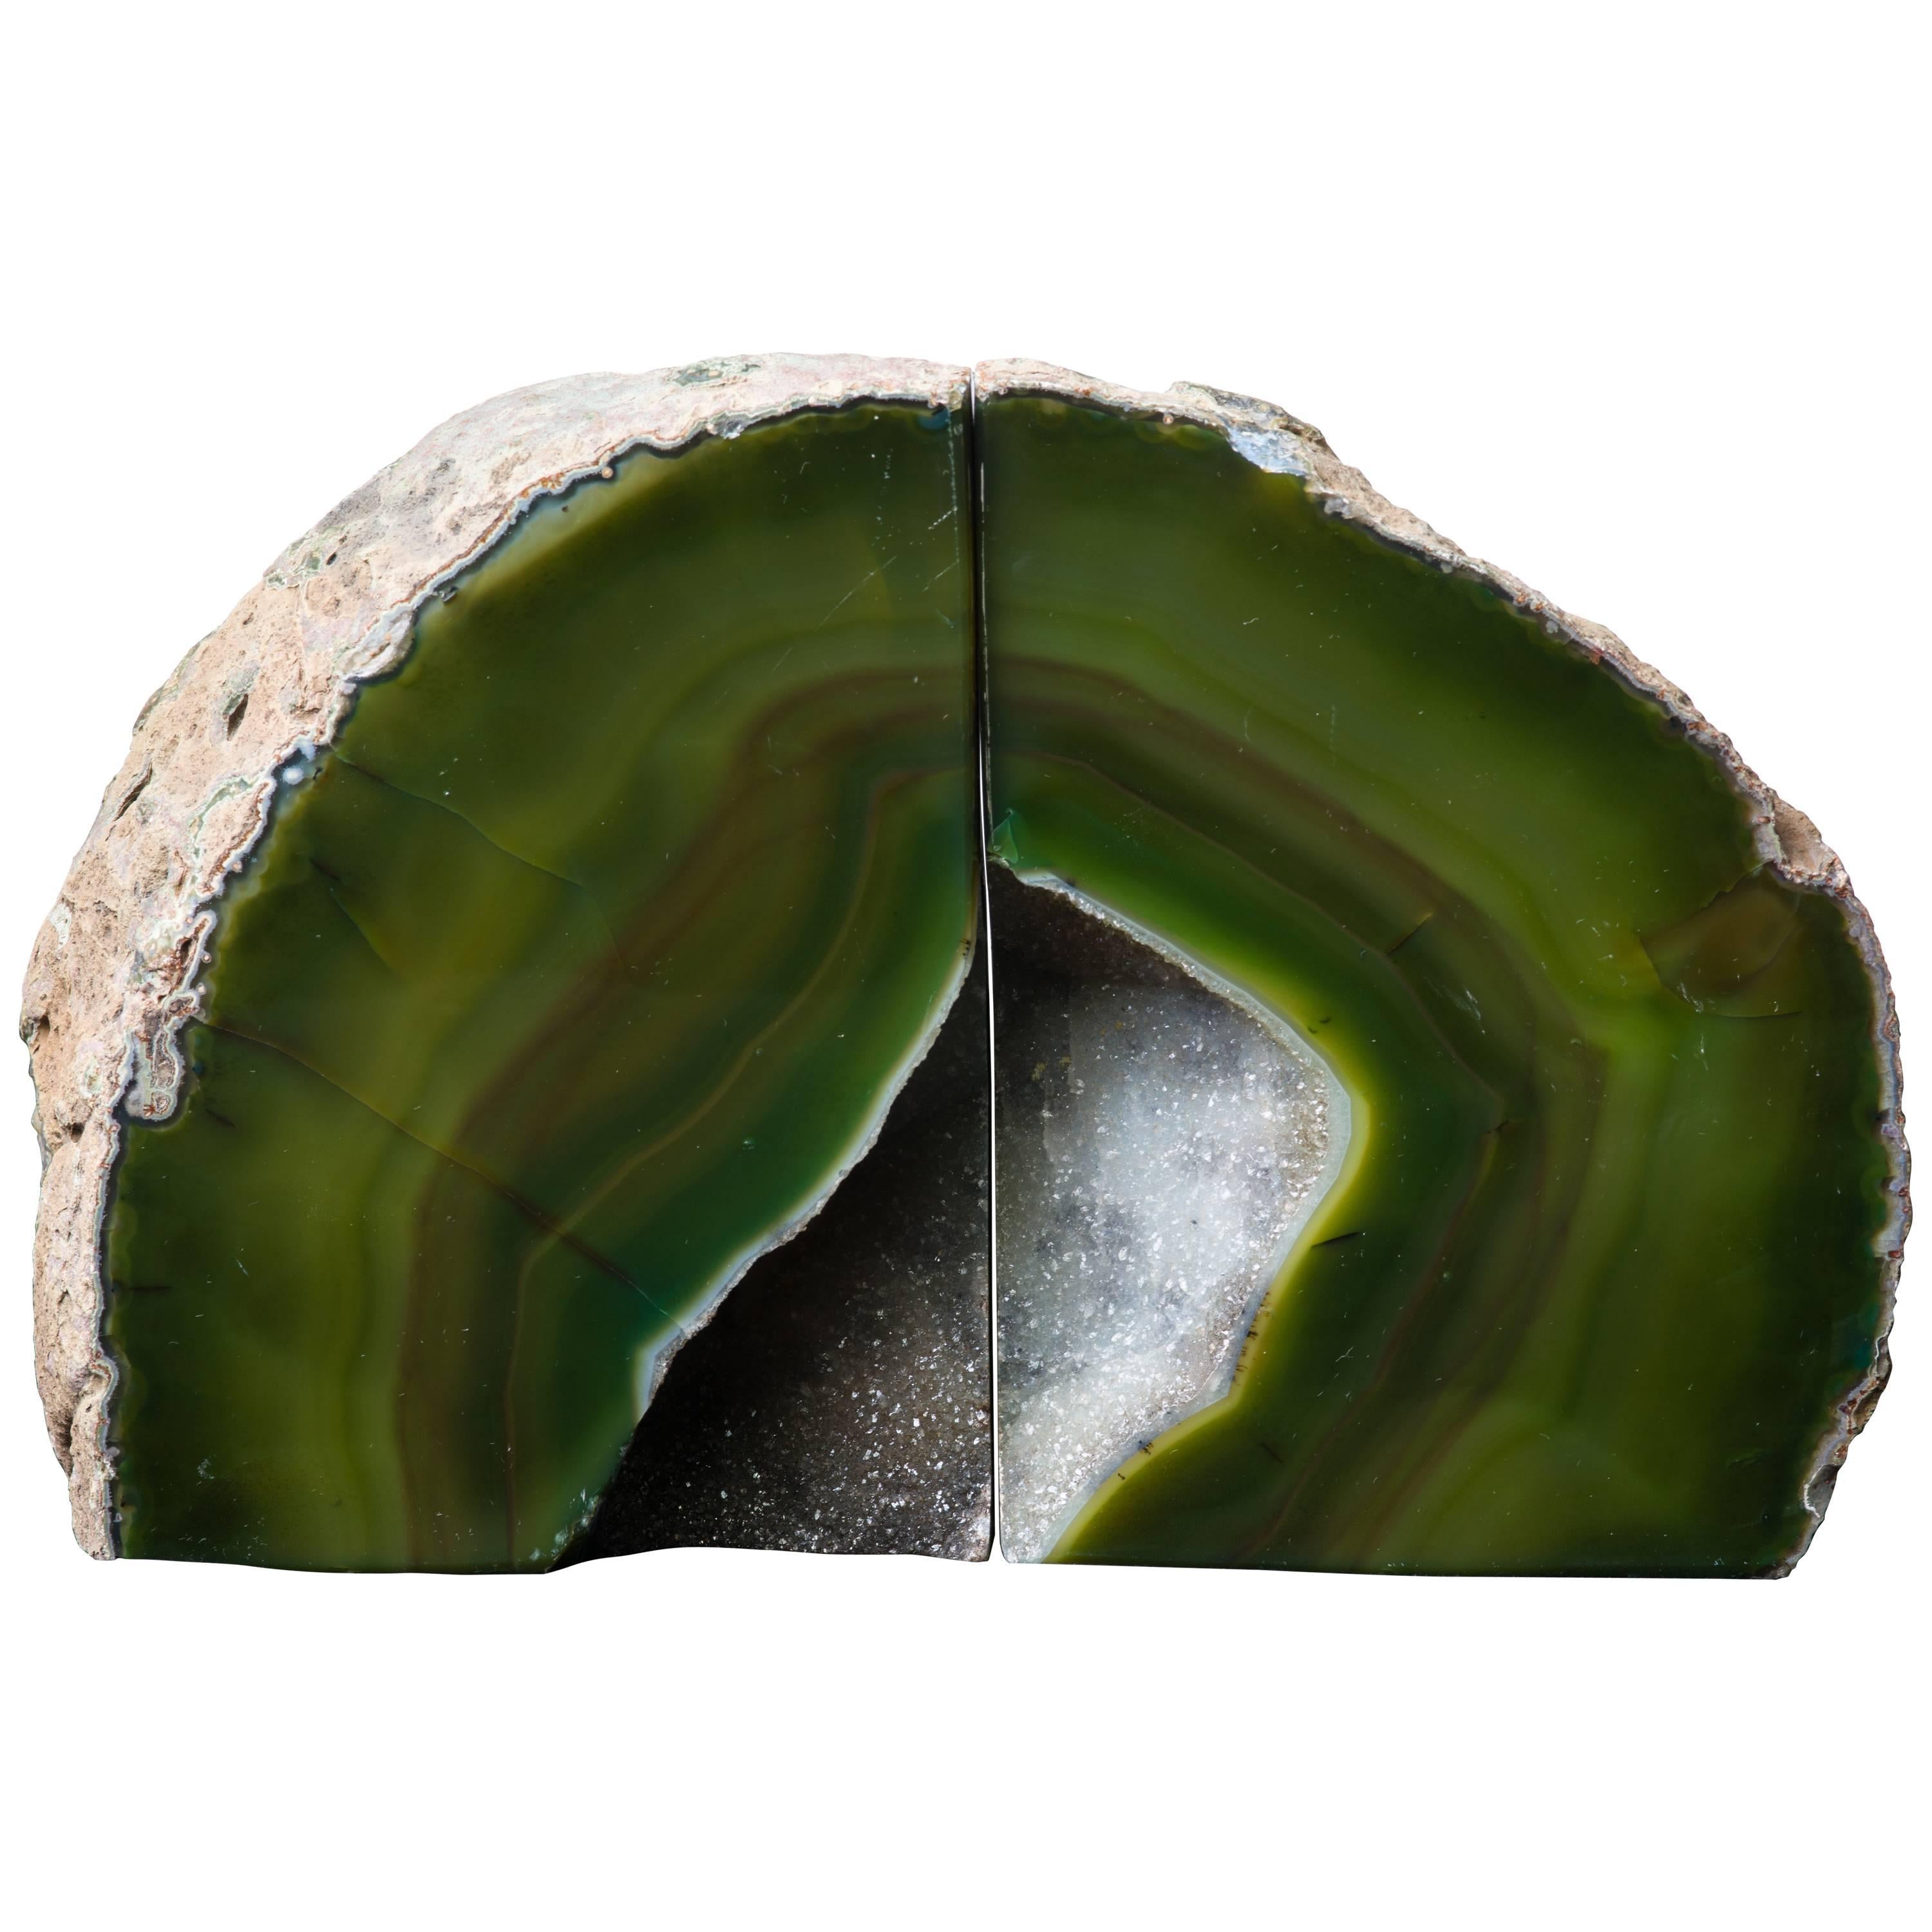 Pair of Organic Modern Agate Stone and Crystal Bookends in Moss Green